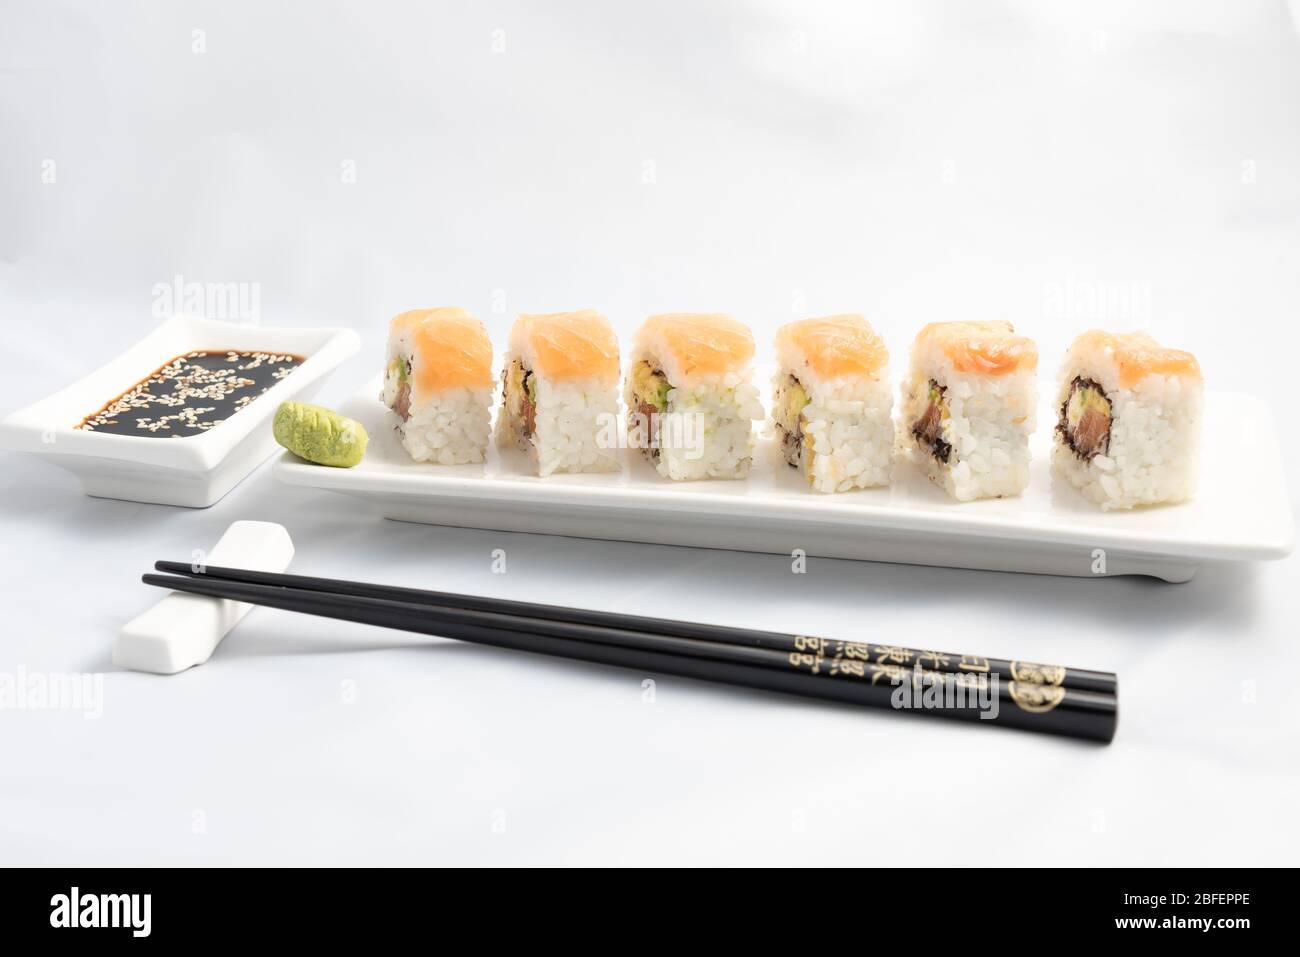 Sushi roll with pink salmon wrap, grilled salmon, Philadelphia cheese and avocado. White container and black chopsticks. Stock Photo